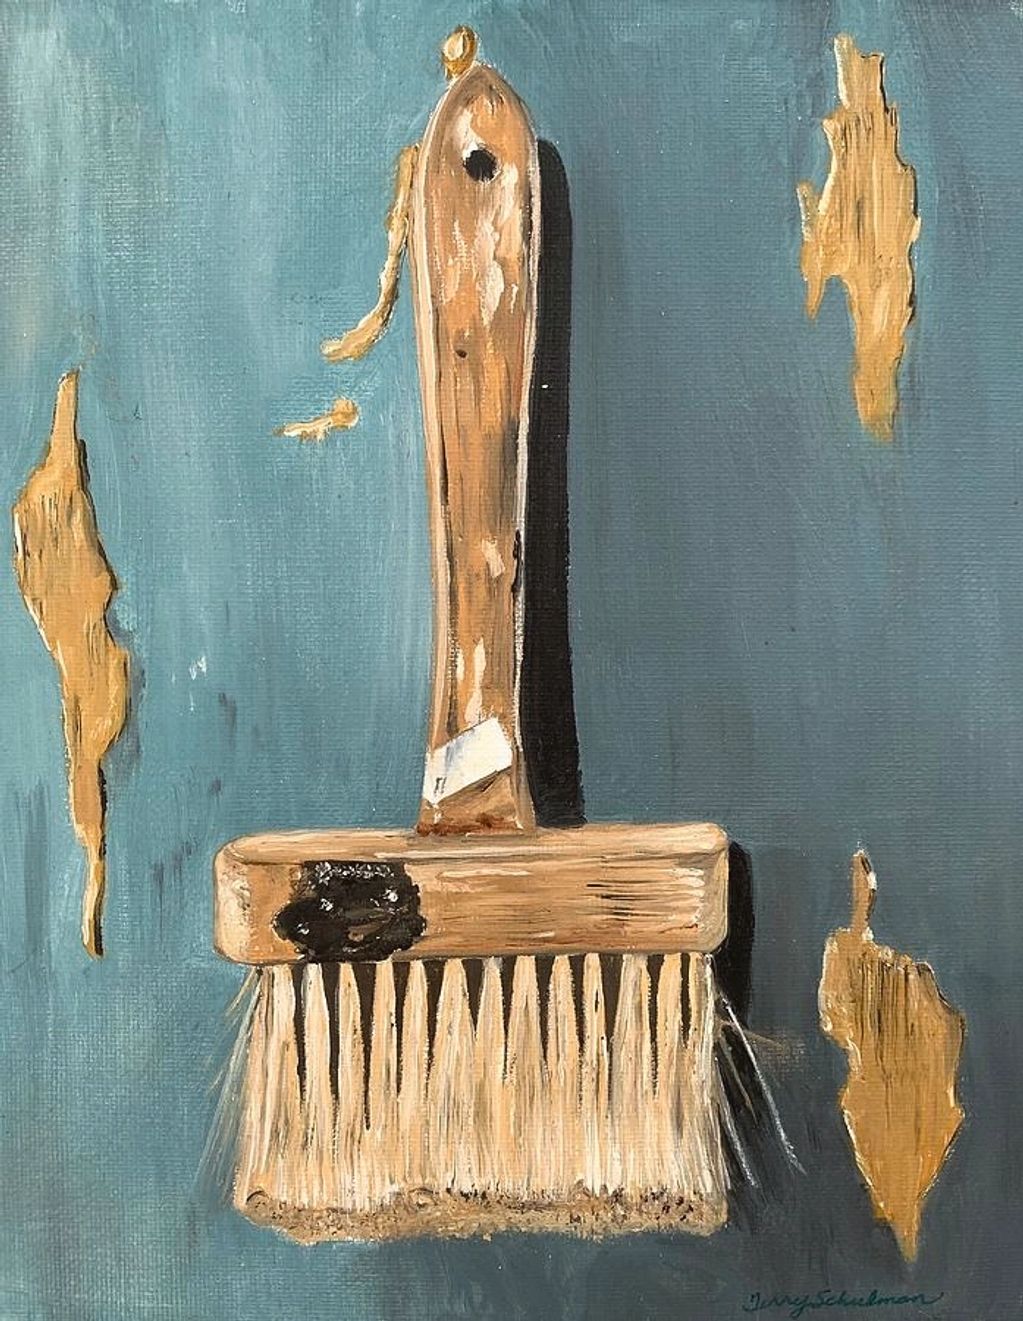 THE OLD PAINTBRUSH - $275.00